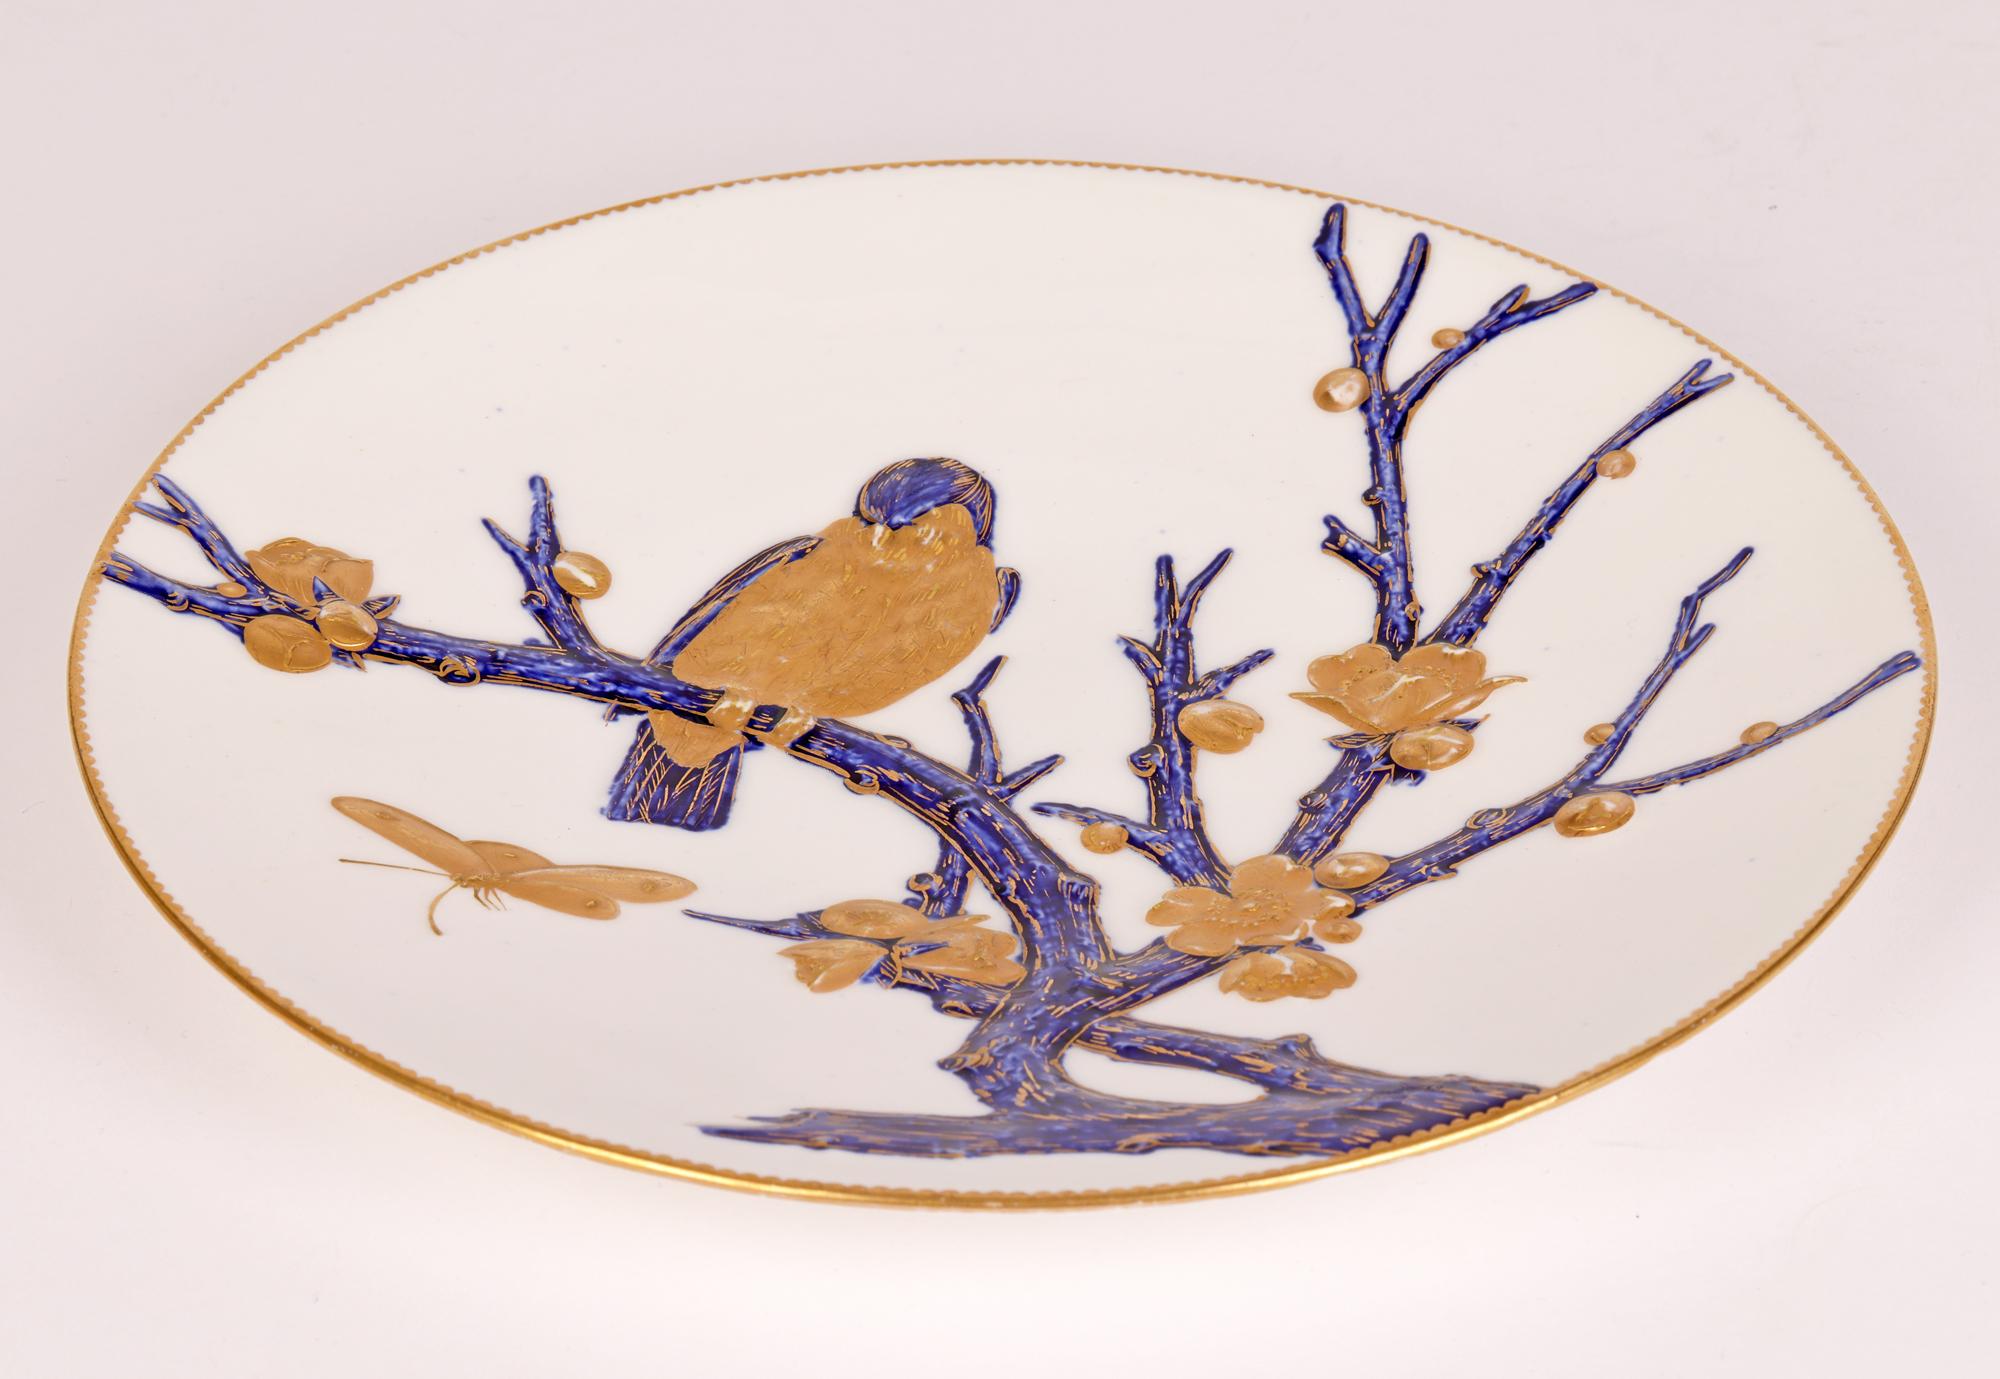 Gilt EJD Bodley Relief Molded Porcelain Cabinet Plate with Bird, 1879